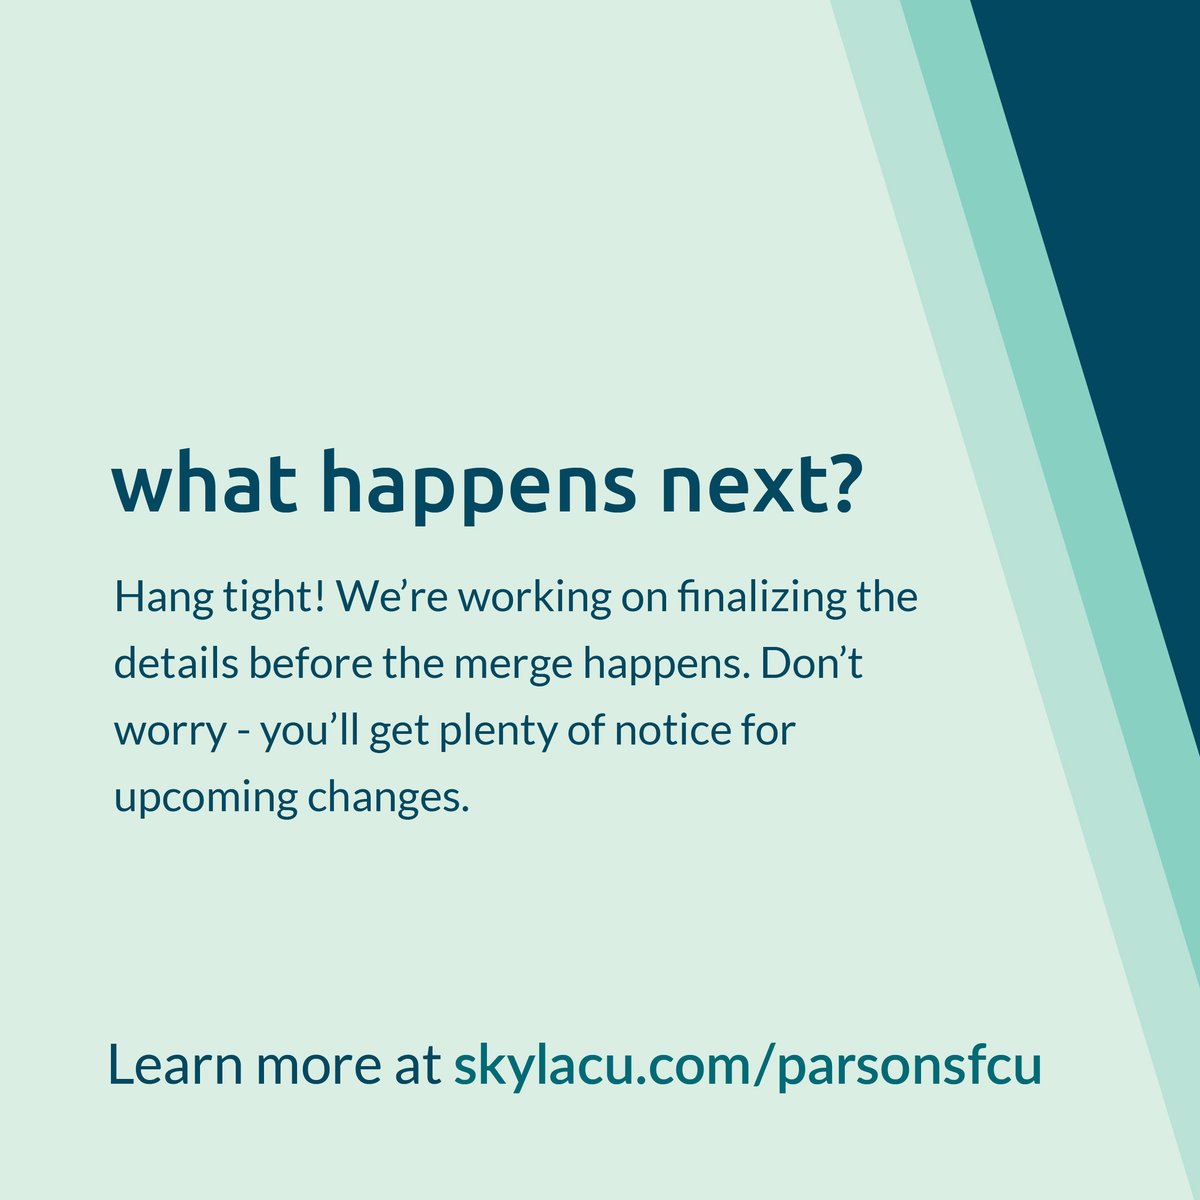 Check out these FAQs to learn more about our merger with Skyla! Visit the link in our bio for more information.

#SkylaCU #ParsonsFCU #BuildingAmazing #BelieveInBetter